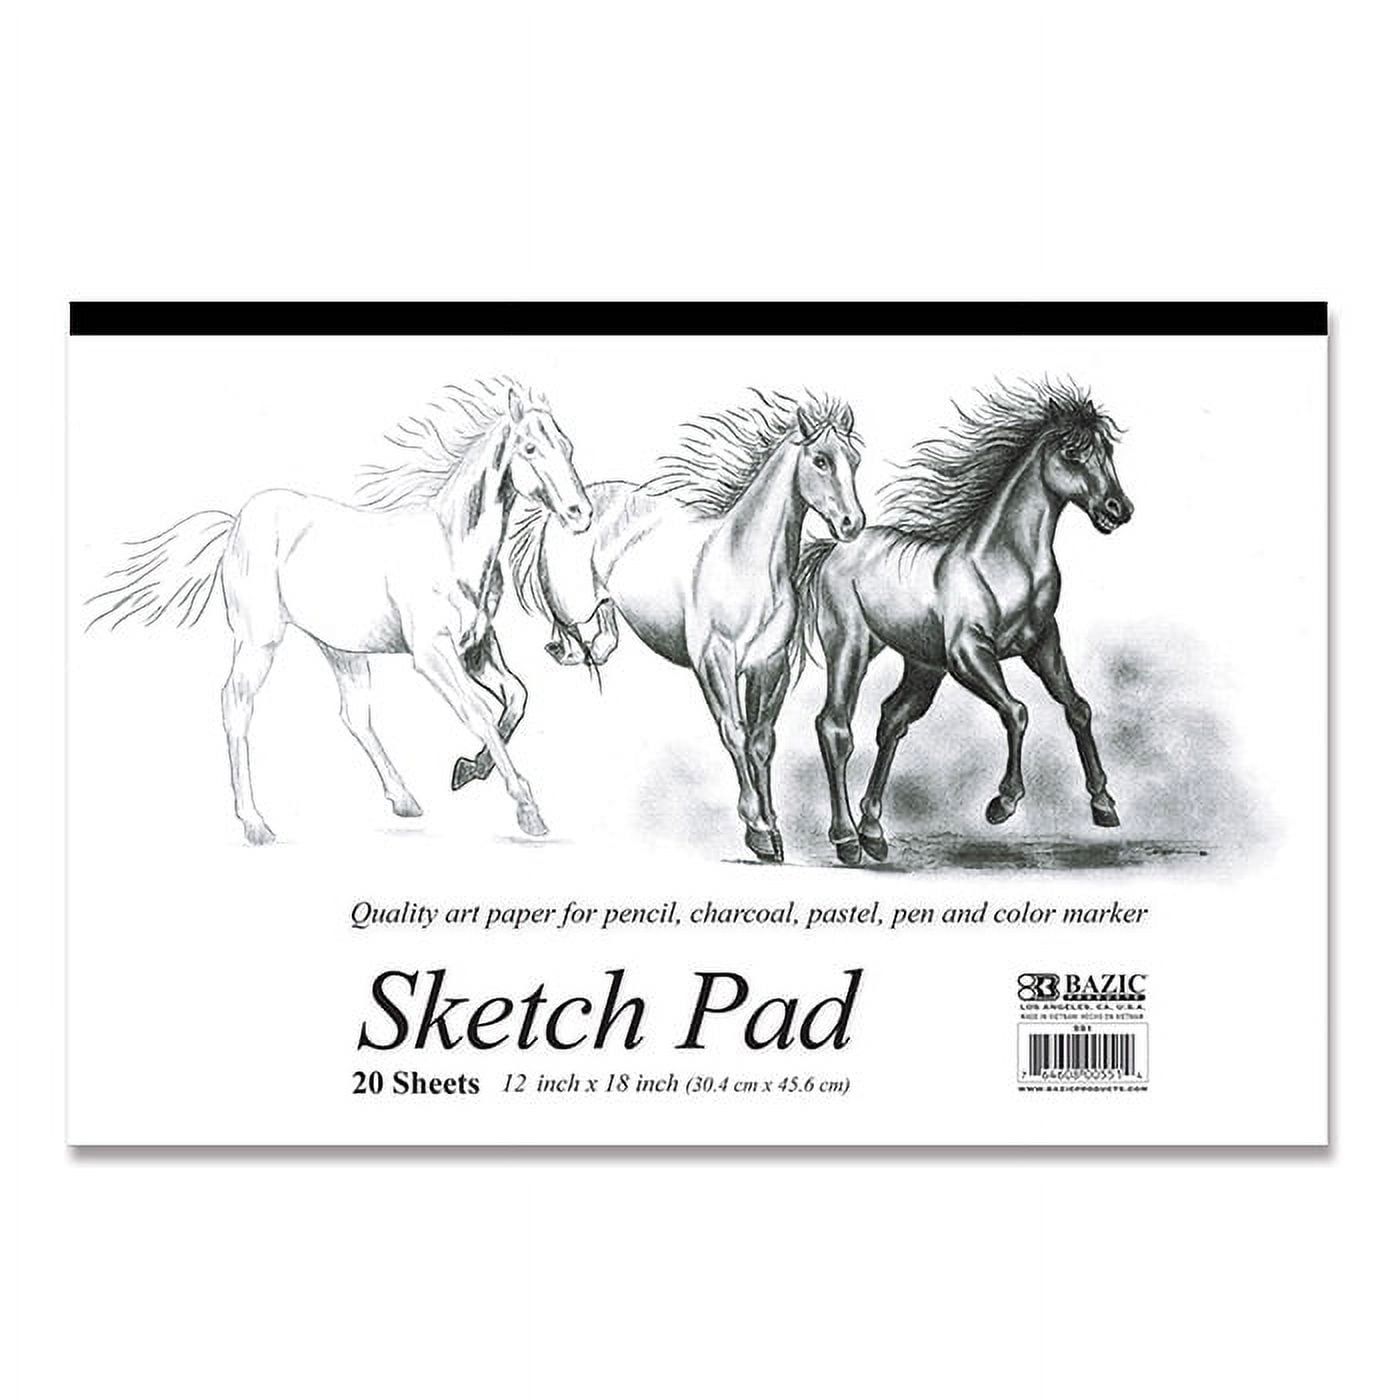 Mozart Sketch Pad – Acid Free Sketch Book - 60 Sheets (160g/m2) Smooth,  Sketch Book Set, Thick Drawing Paper - Ideal for Kids, Teens & Adults.  Perfect